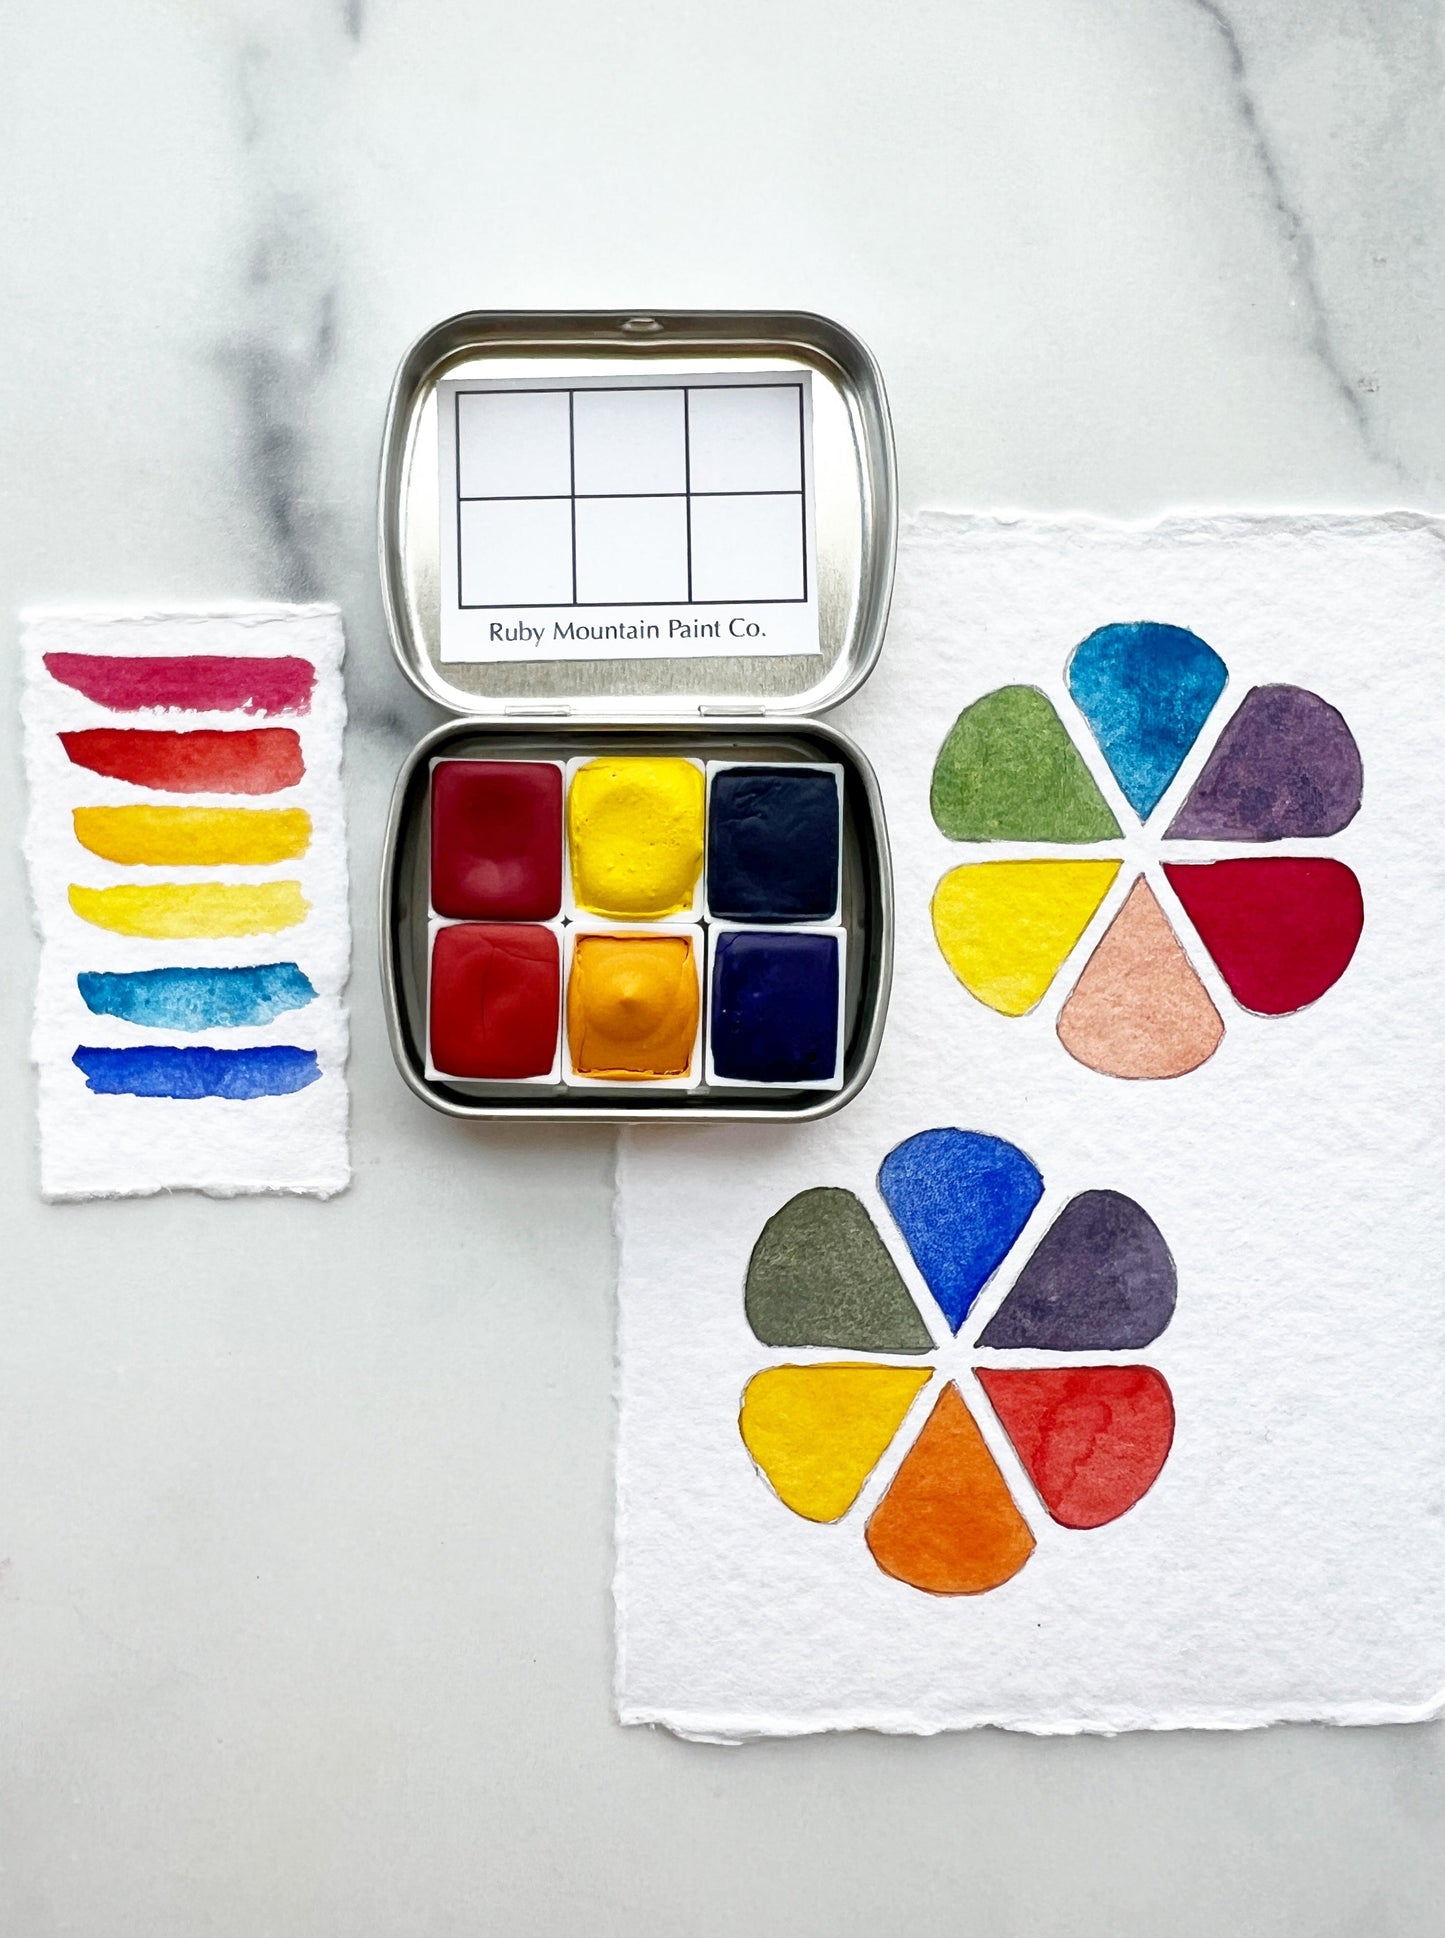 The Split 6 Primary Palette, a six color set of handmade watercolors